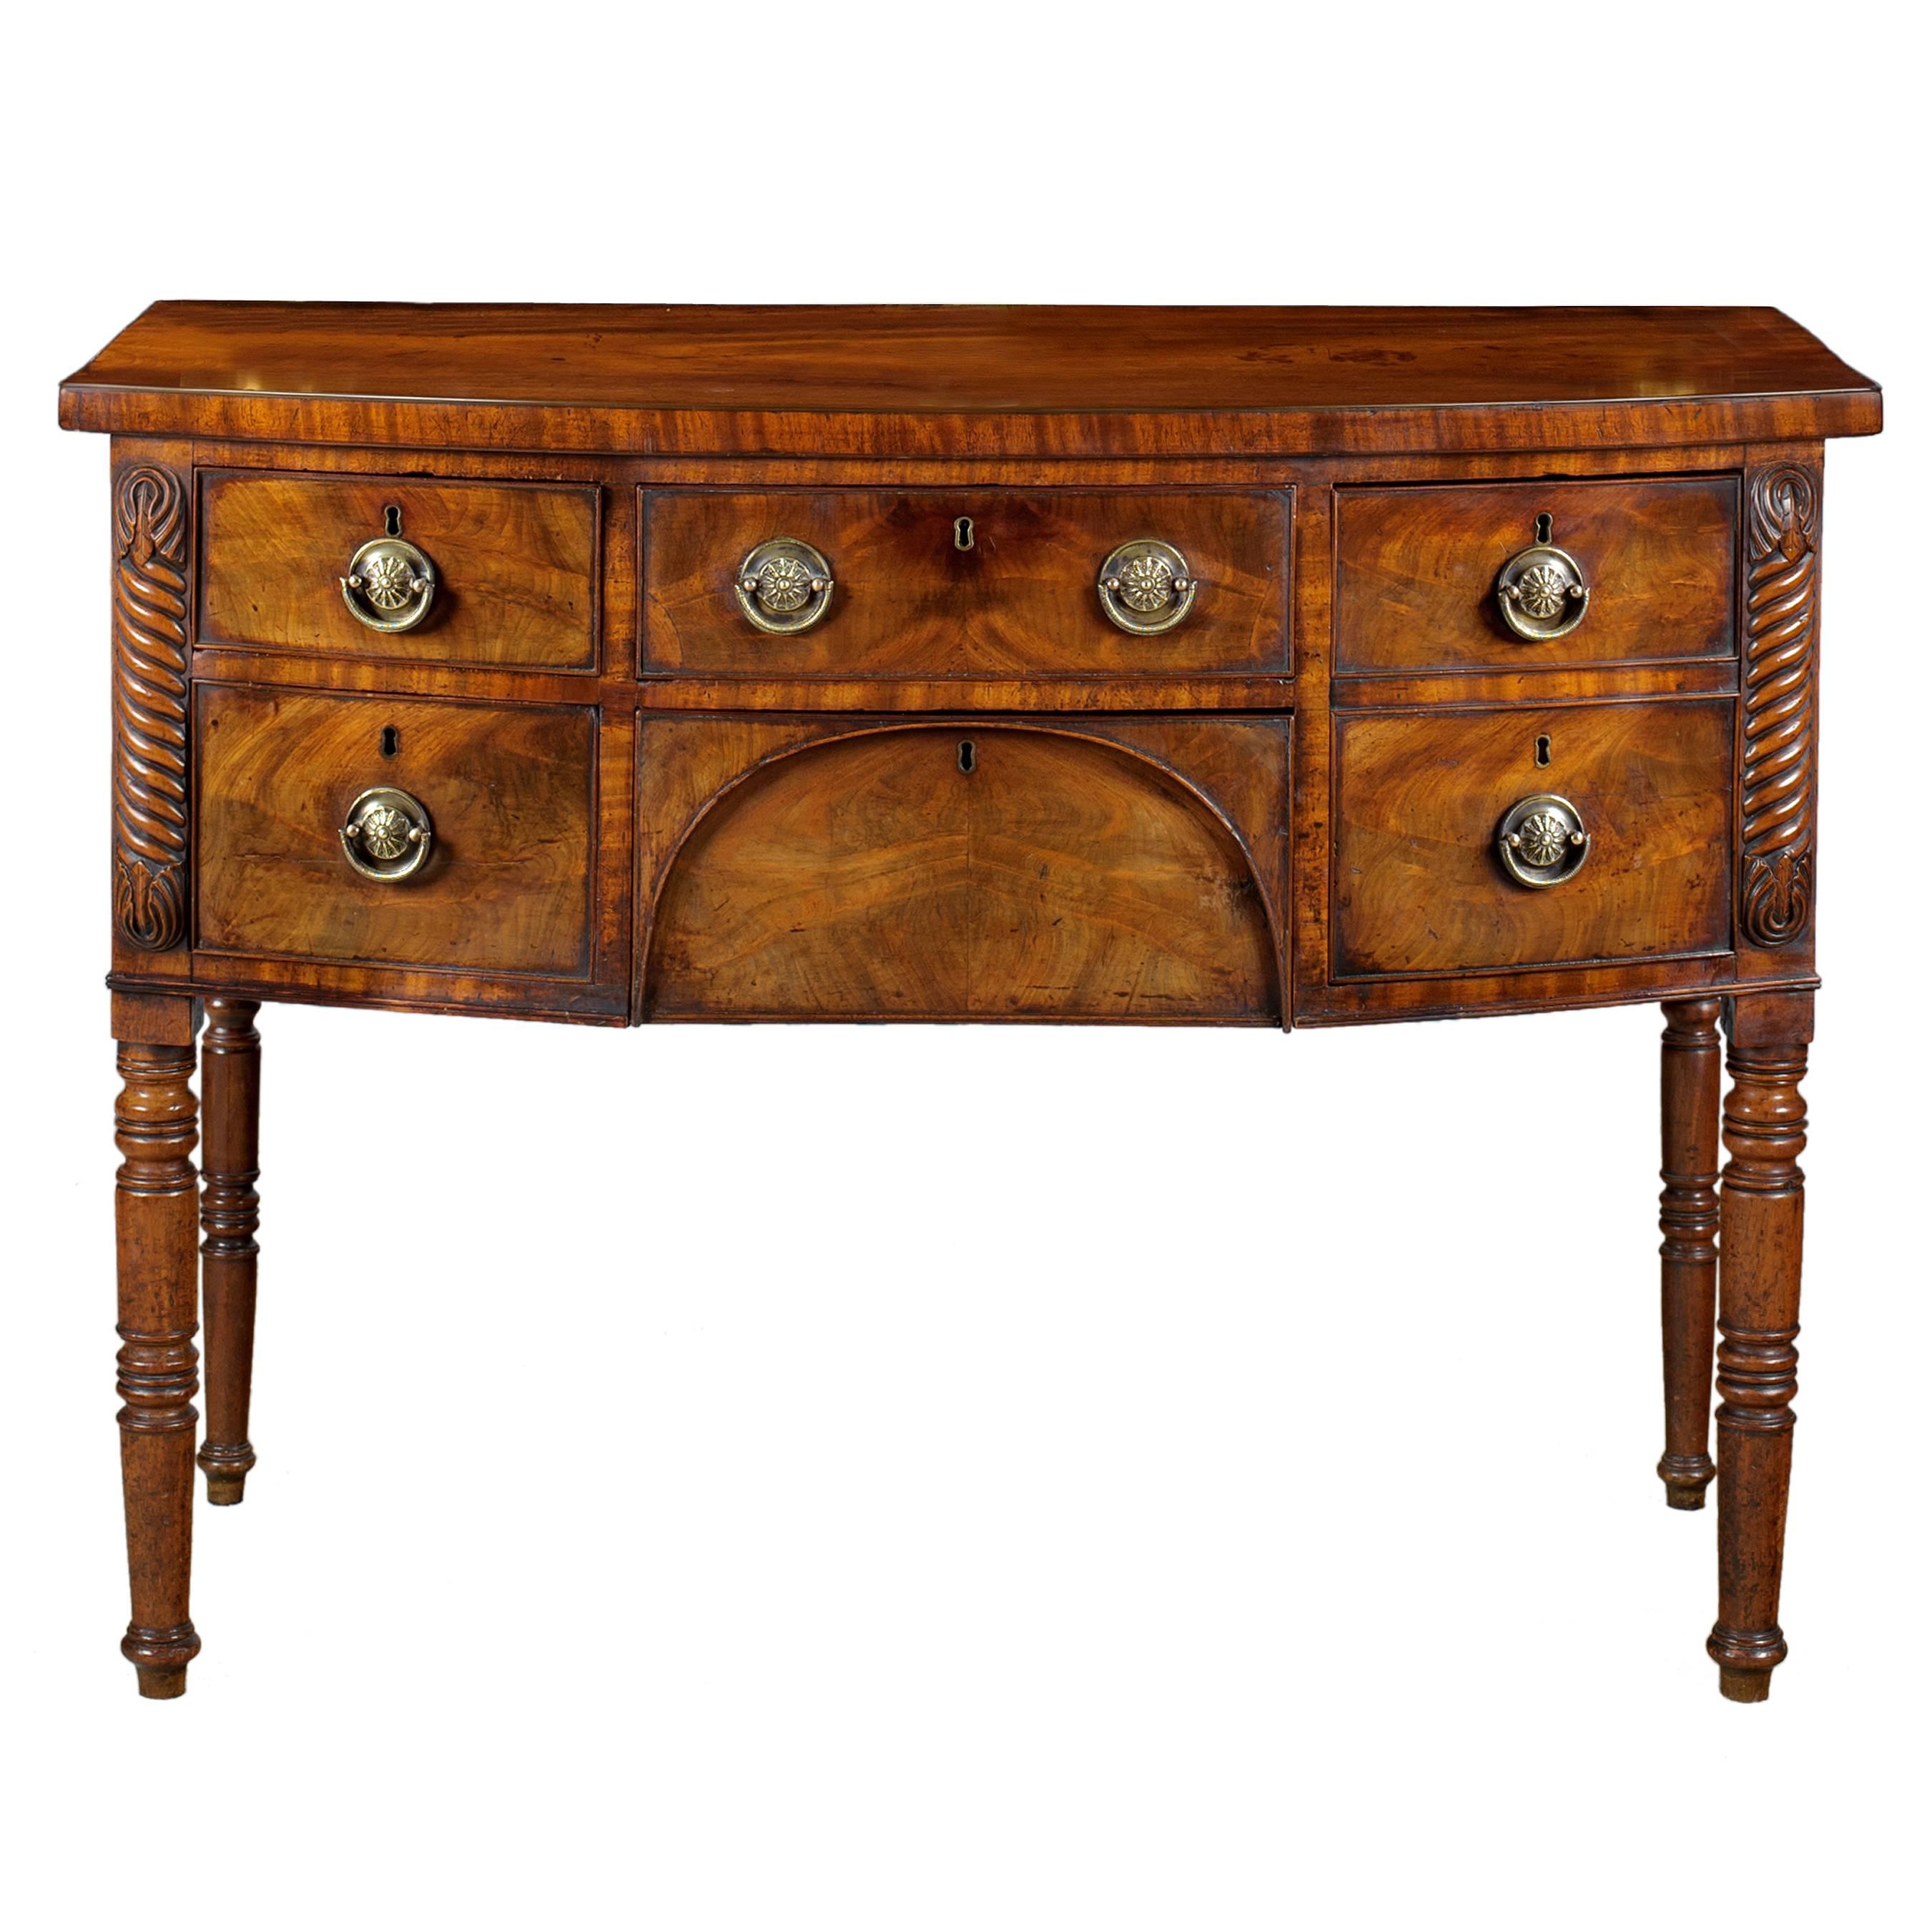 A very pretty and small Regency period mahogany bow fronted sideboard with a two drawers to the left, a drawer and an arched napery drawer to the centre and a deep drawer to the right flanked by stylized palm fronds with a cable or rope twist